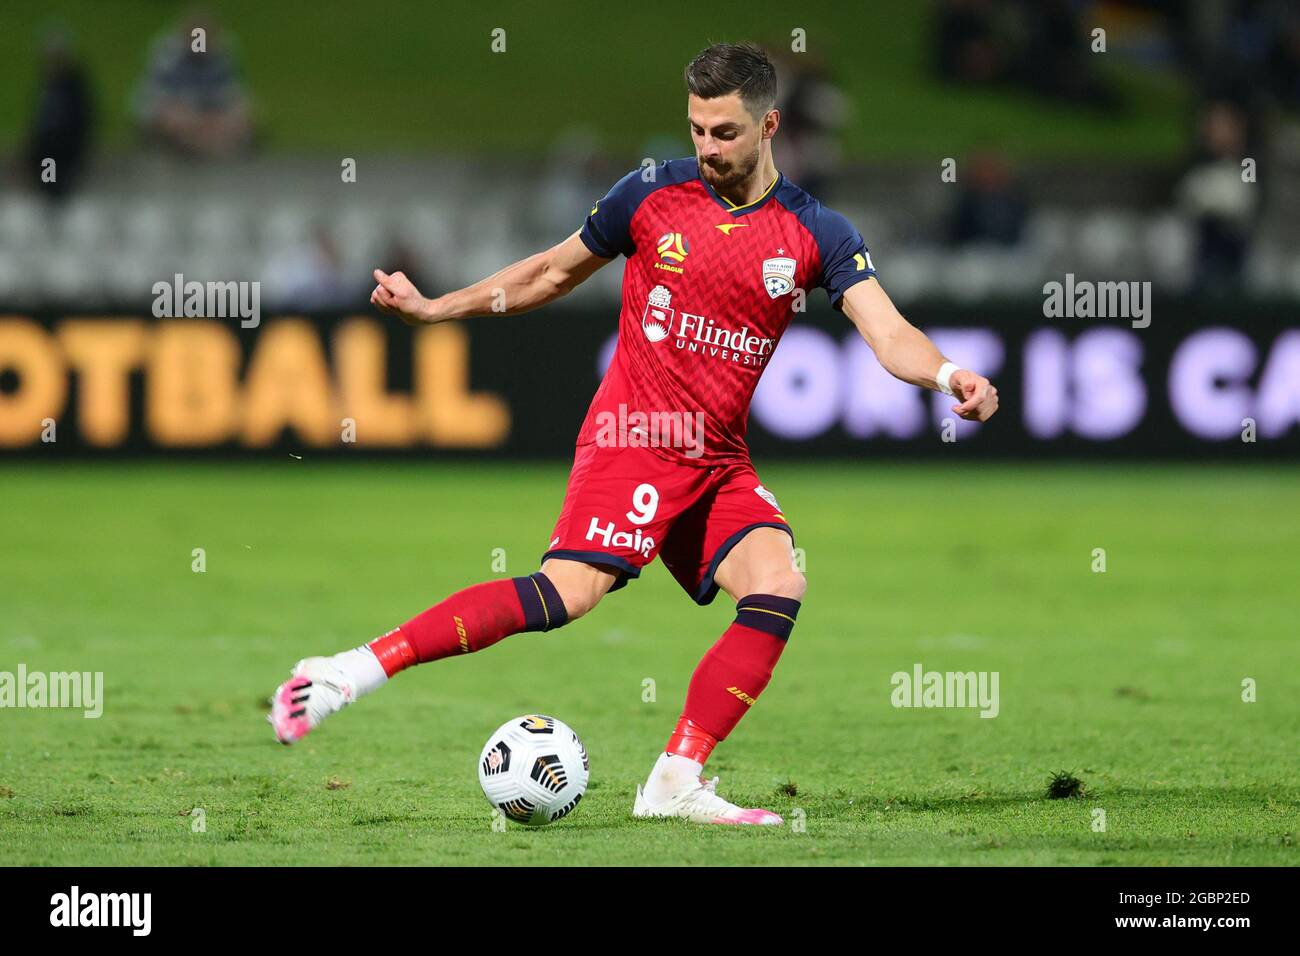 SYDNEY, AUSTRALIA - JUNE 19: Tomi Juric of Adelaide United crosses the ball during the A-League semi-final soccer match between Sydney FC and Adelaide United on June 19, 2021 at Netstrata Jubilee Stadium in Sydney, Australia. Credit: Pete Dovgan/Speed Media/Alamy Live News Stock Photo